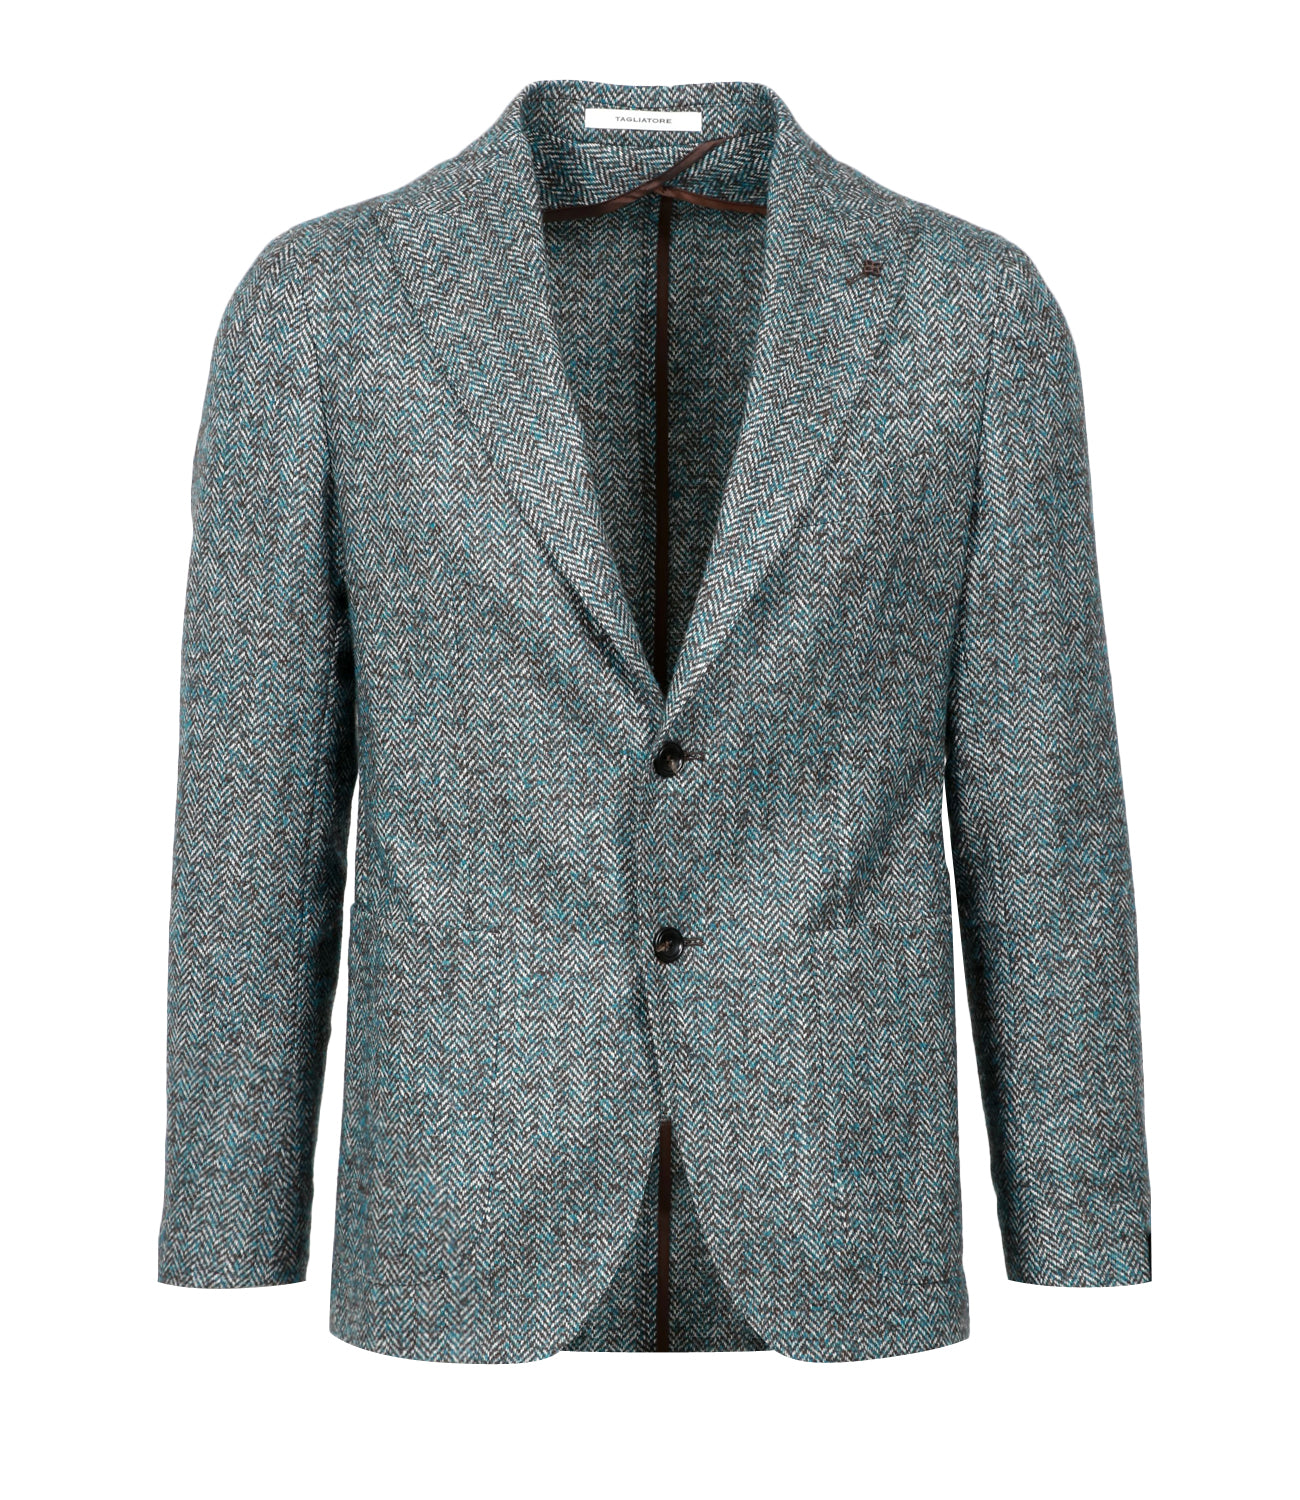 Tagliatore | Blue and Brown Jacket